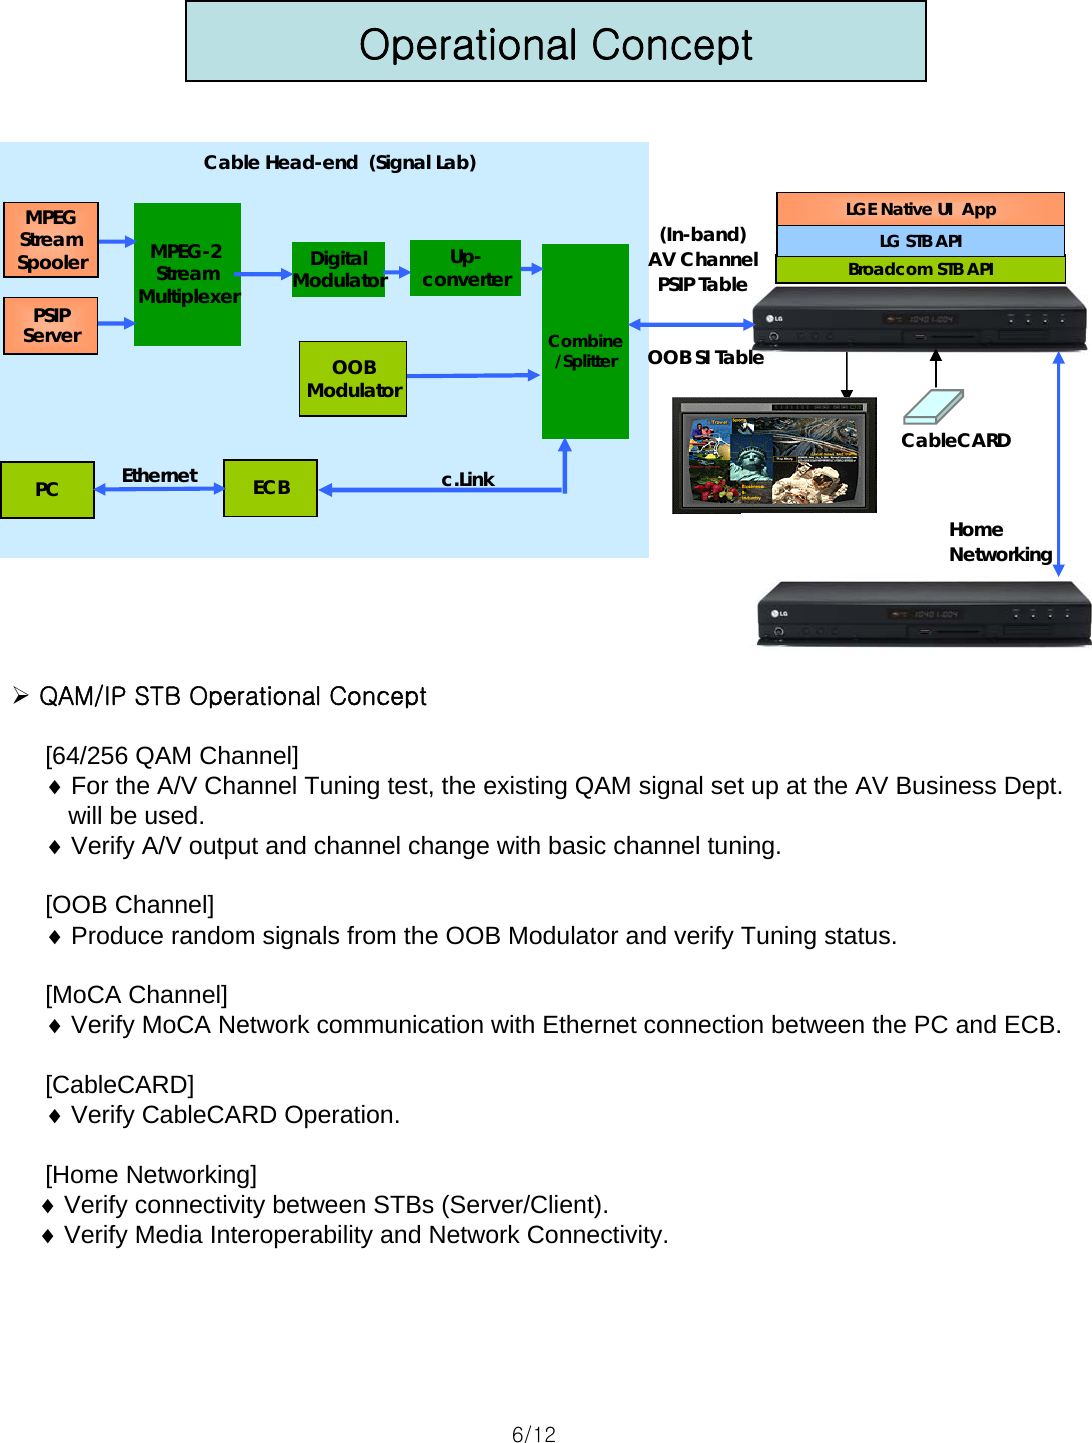 MPEG-2 StreamMultiplexerCombine/SplitterOOBModulatorMPEGStreamSpooler DigitalModulator Up-converterCable Head-end  (Signal Lab)PSIPServer(In-band)AV ChannelPSIP TableCableCARDPC ECBEthernet c.Link[64/256 QAM Channel] ♦For the A/V Channel Tuning test, the existing QAM signal set up at the AV Business Dept. will be used.♦Verify A/V output and channel change with basic channel tuning.[OOB Channel]♦Produce random signals from the OOB Modulator and verify Tuning status.[MoCA Channel]♦Verify MoCA Network communication with Ethernet connection between the PC and ECB.[CableCARD]♦Verify CableCARD Operation.[Home Networking] ♦Verify connectivity between STBs (Server/Client). ♦Verify Media Interoperability and Network Connectivity.LGE Native UI  AppOOB SI TableBroadcom STB APILG STB APIOperational ConceptHome Networking¾QAM/IP STB Operational Concept6/12 